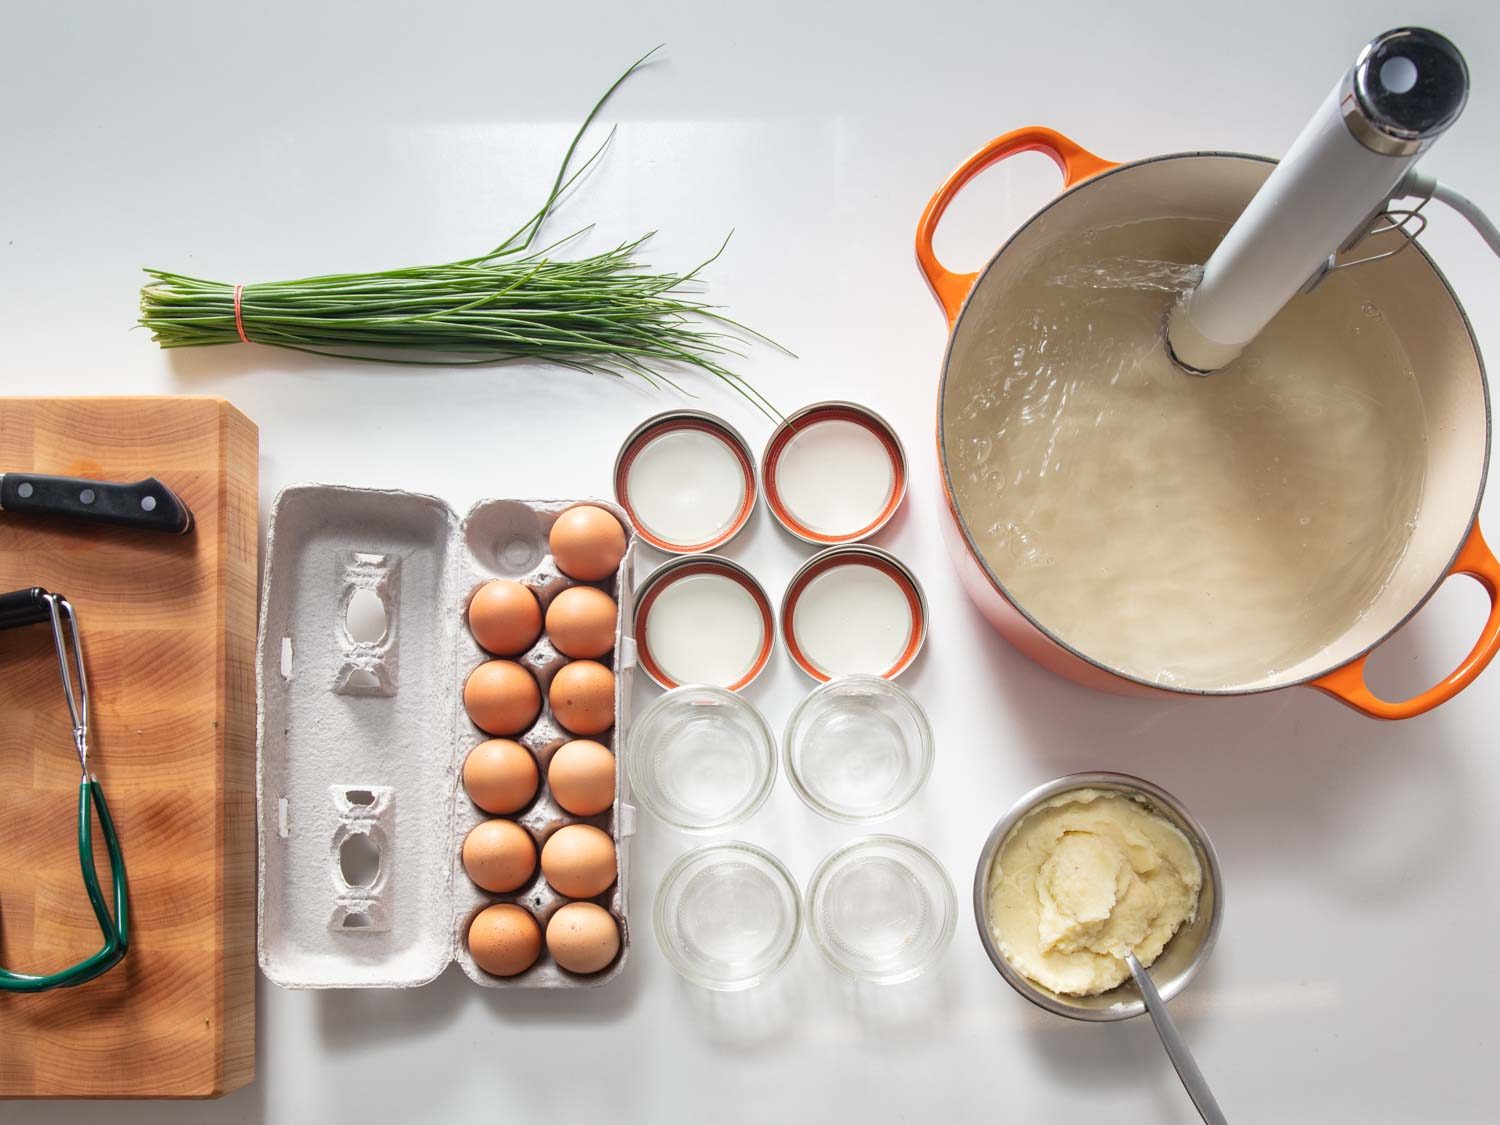 Overhead of set-up and ingredients for sous vide mashed potato egg jars, with an immersion circulator water bath, Mason jars, mashed potatoes, a carton of eggs, and chives.